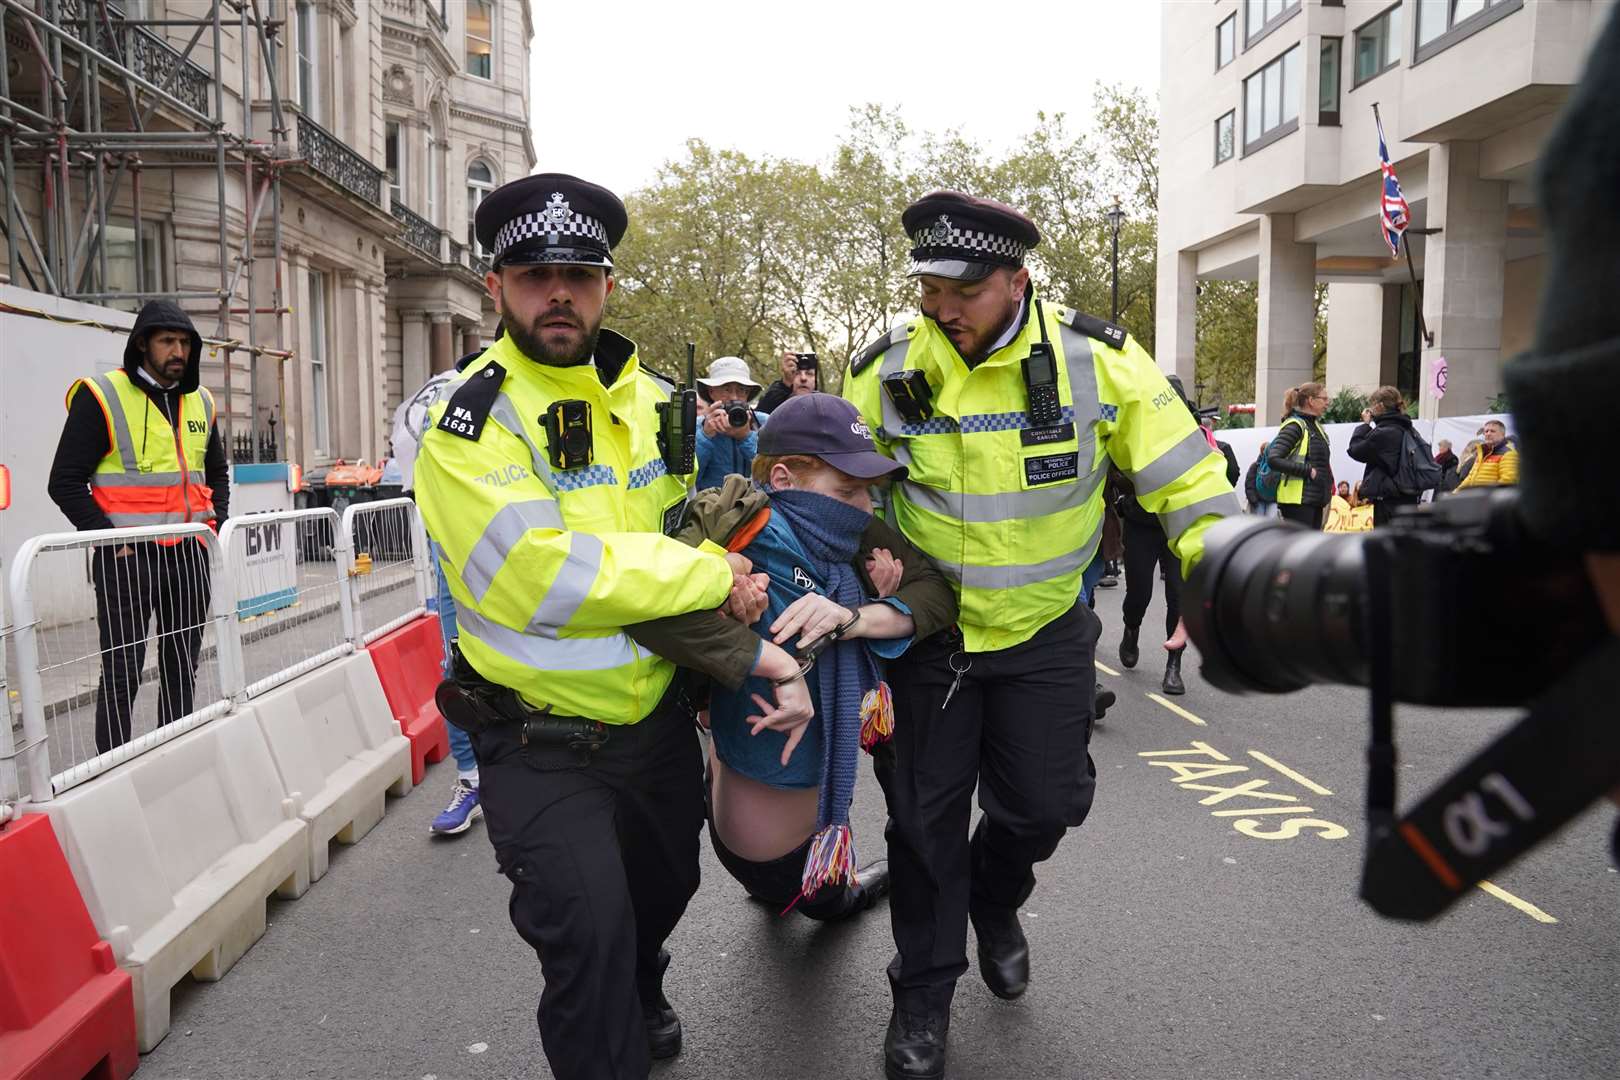 Police remove an activist during the protest (Lucy North/PA)